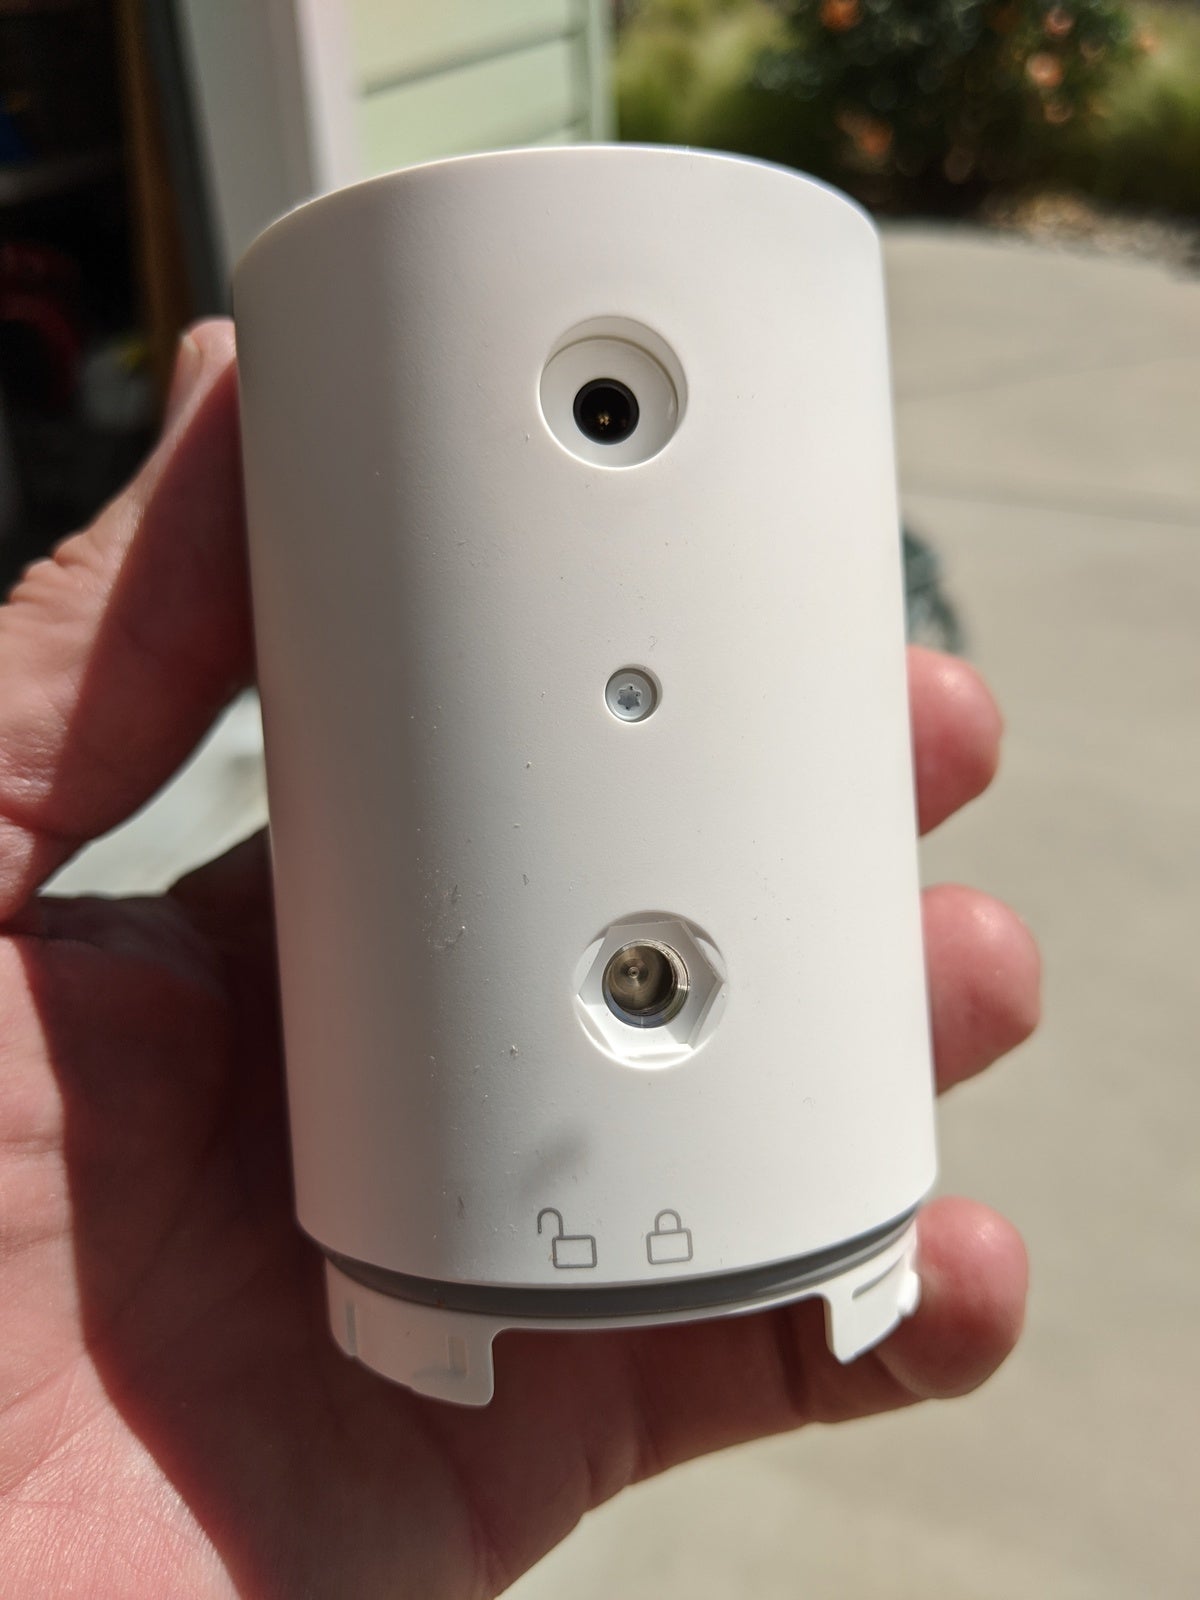 Ring Stick Up Cam Battery review: this versatile security camera doesn't  cost too much - CNET